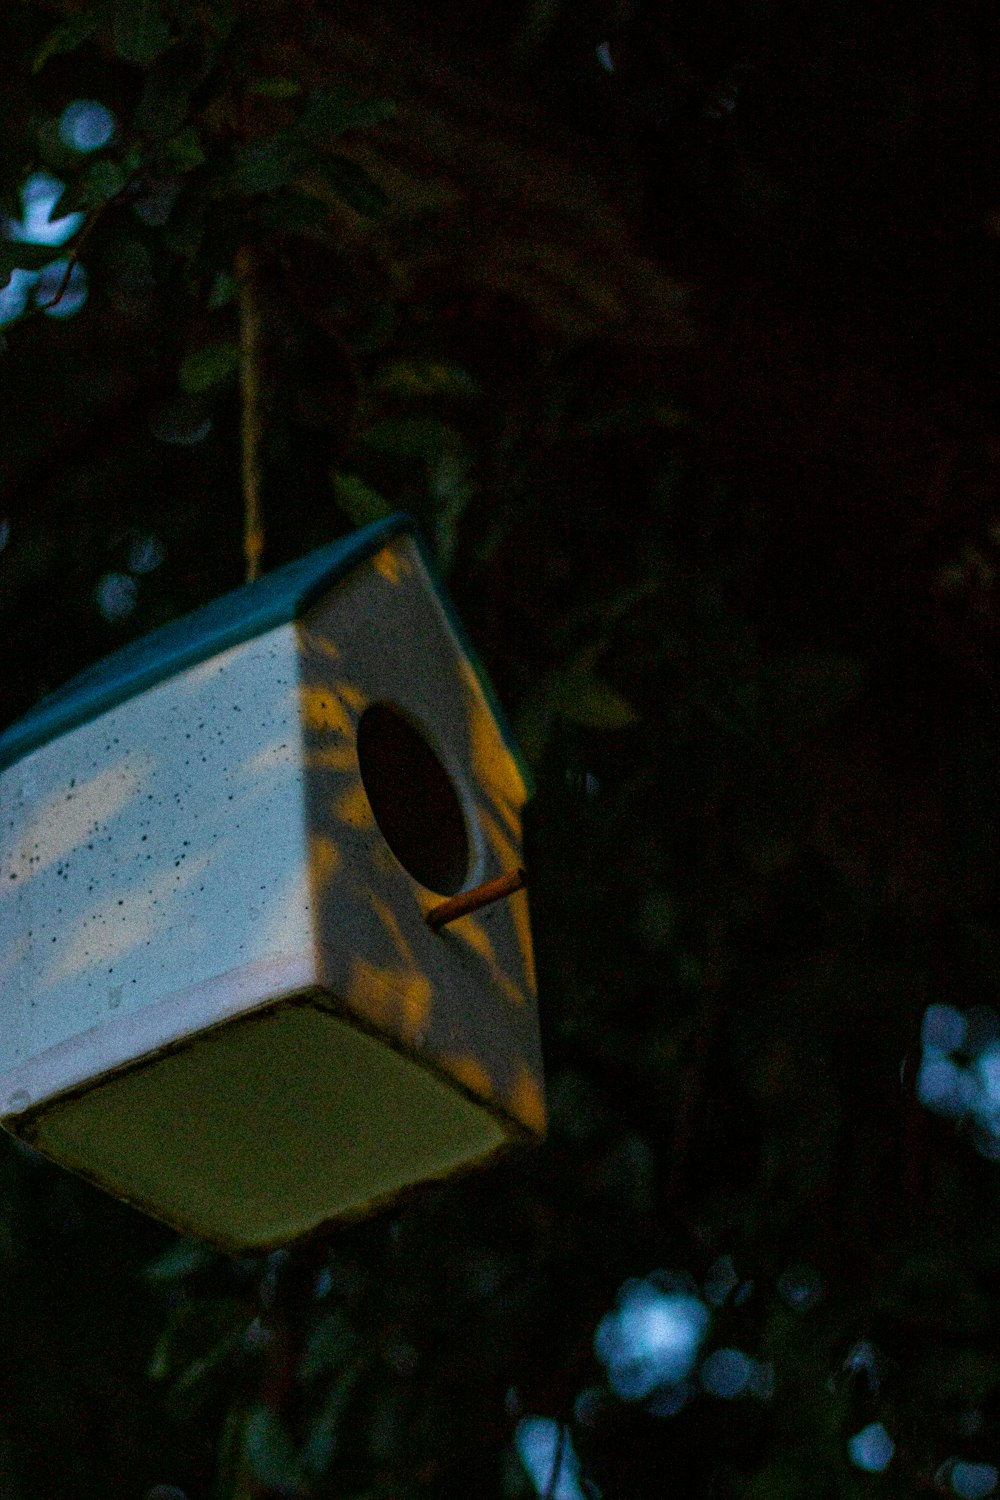 a birdhouse hanging from a tree in the dark